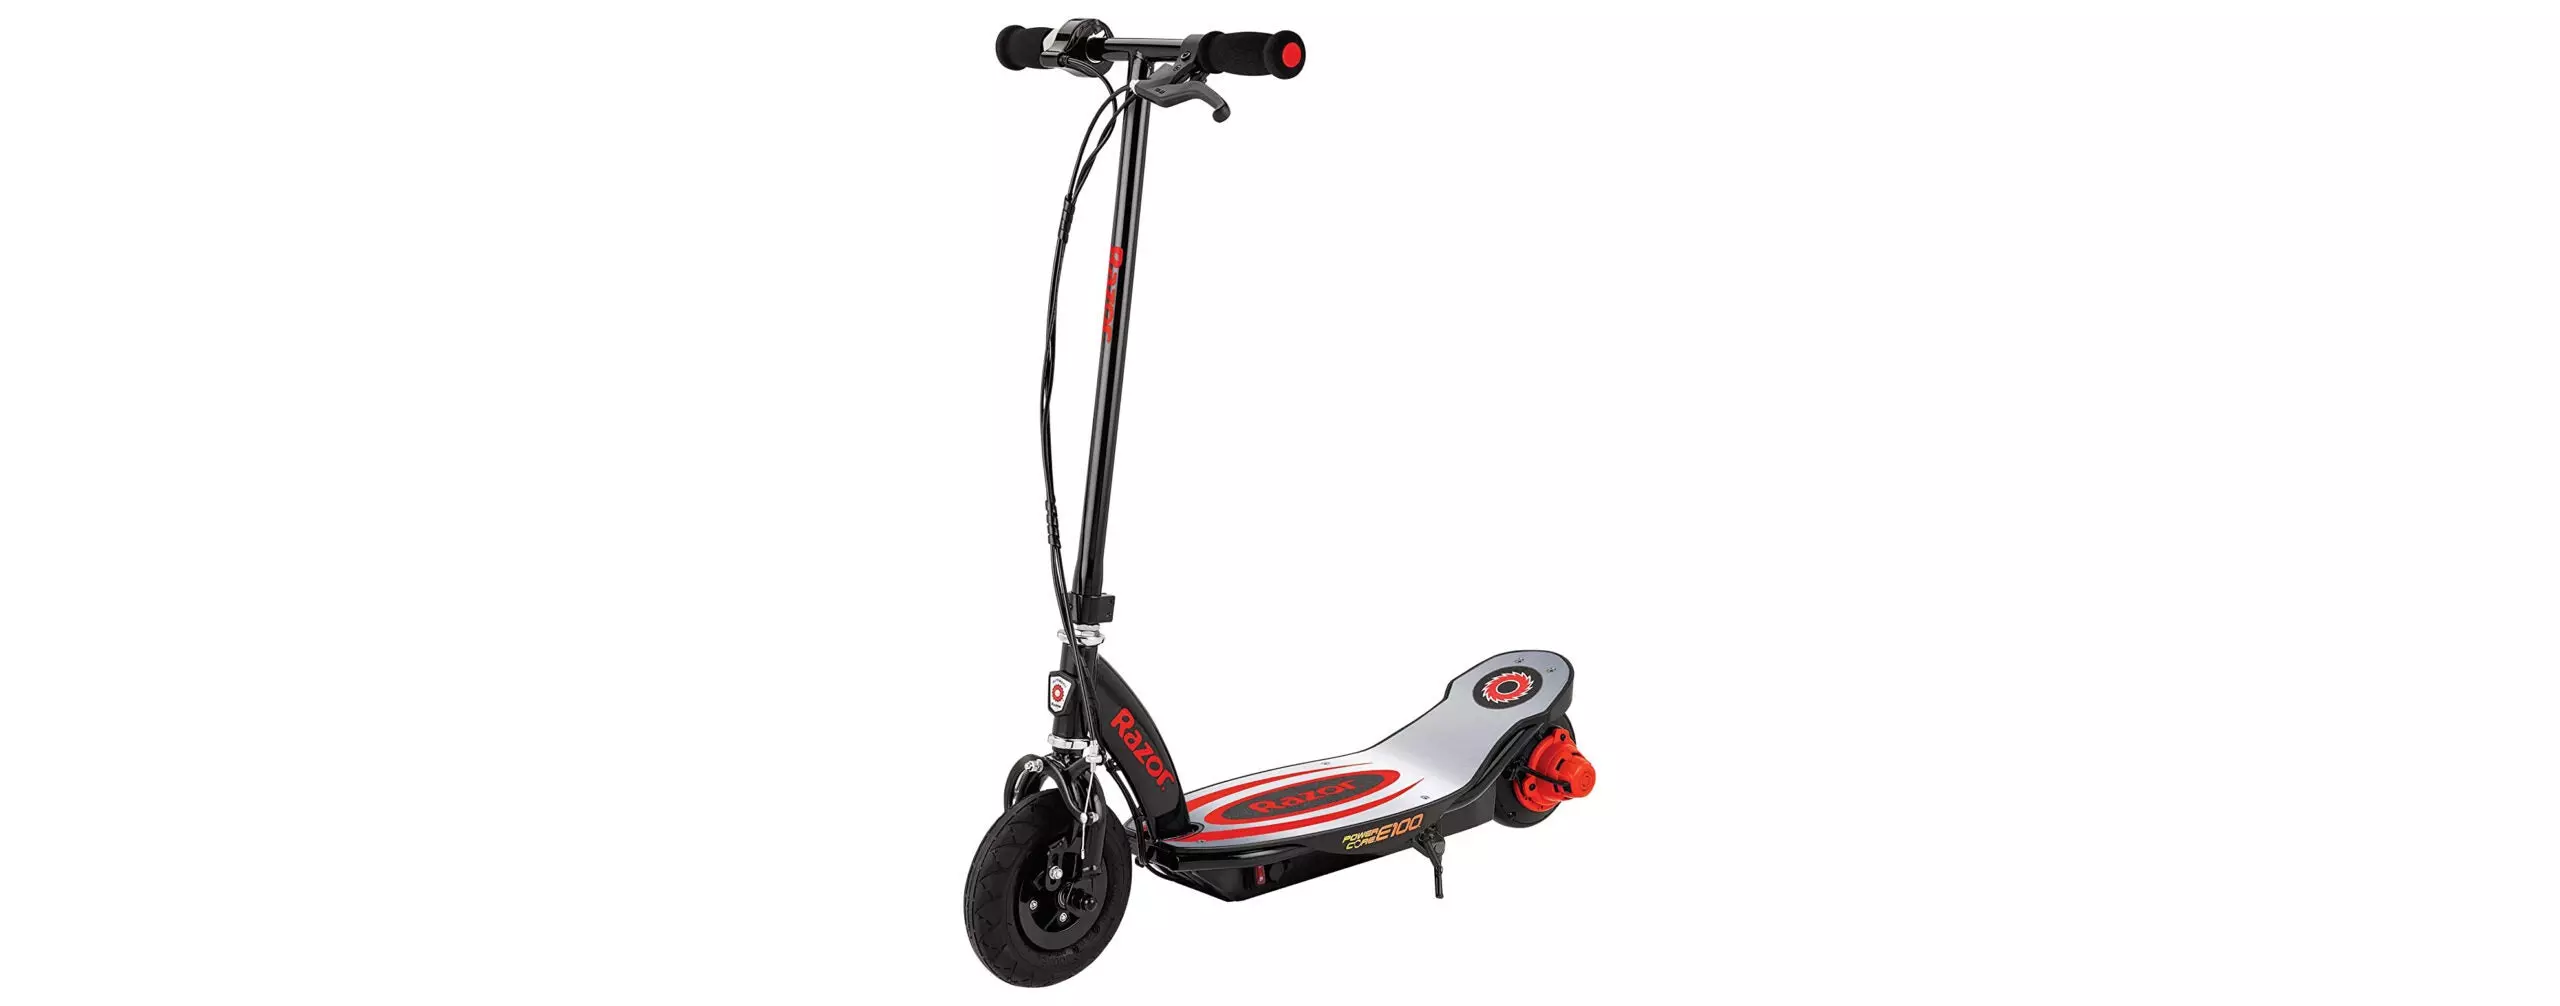 The Best Razor Electric Scooters (Review & Buying Guide) in 2021